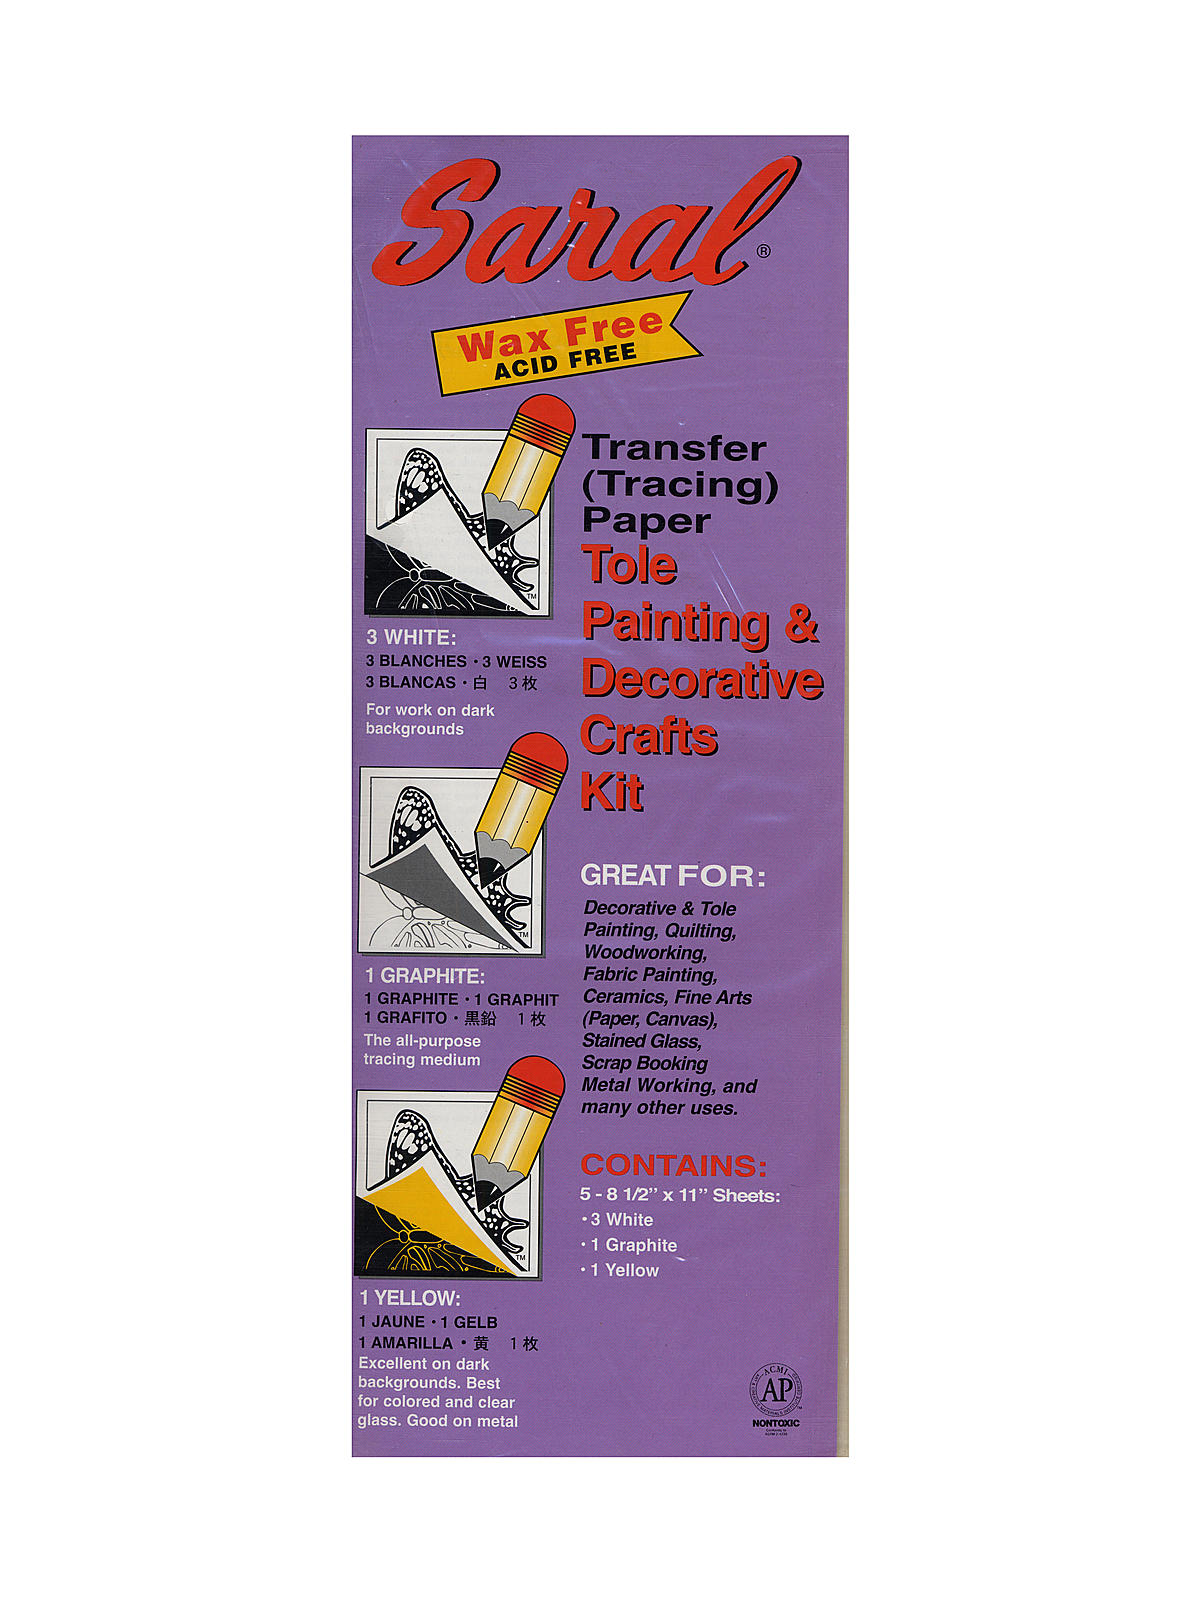 Transfer (tracing) Paper Tole Painting And Decorative Crafts Pack Of 5 Sheets 8 1 2 In. X 11 In. Pack Of 5